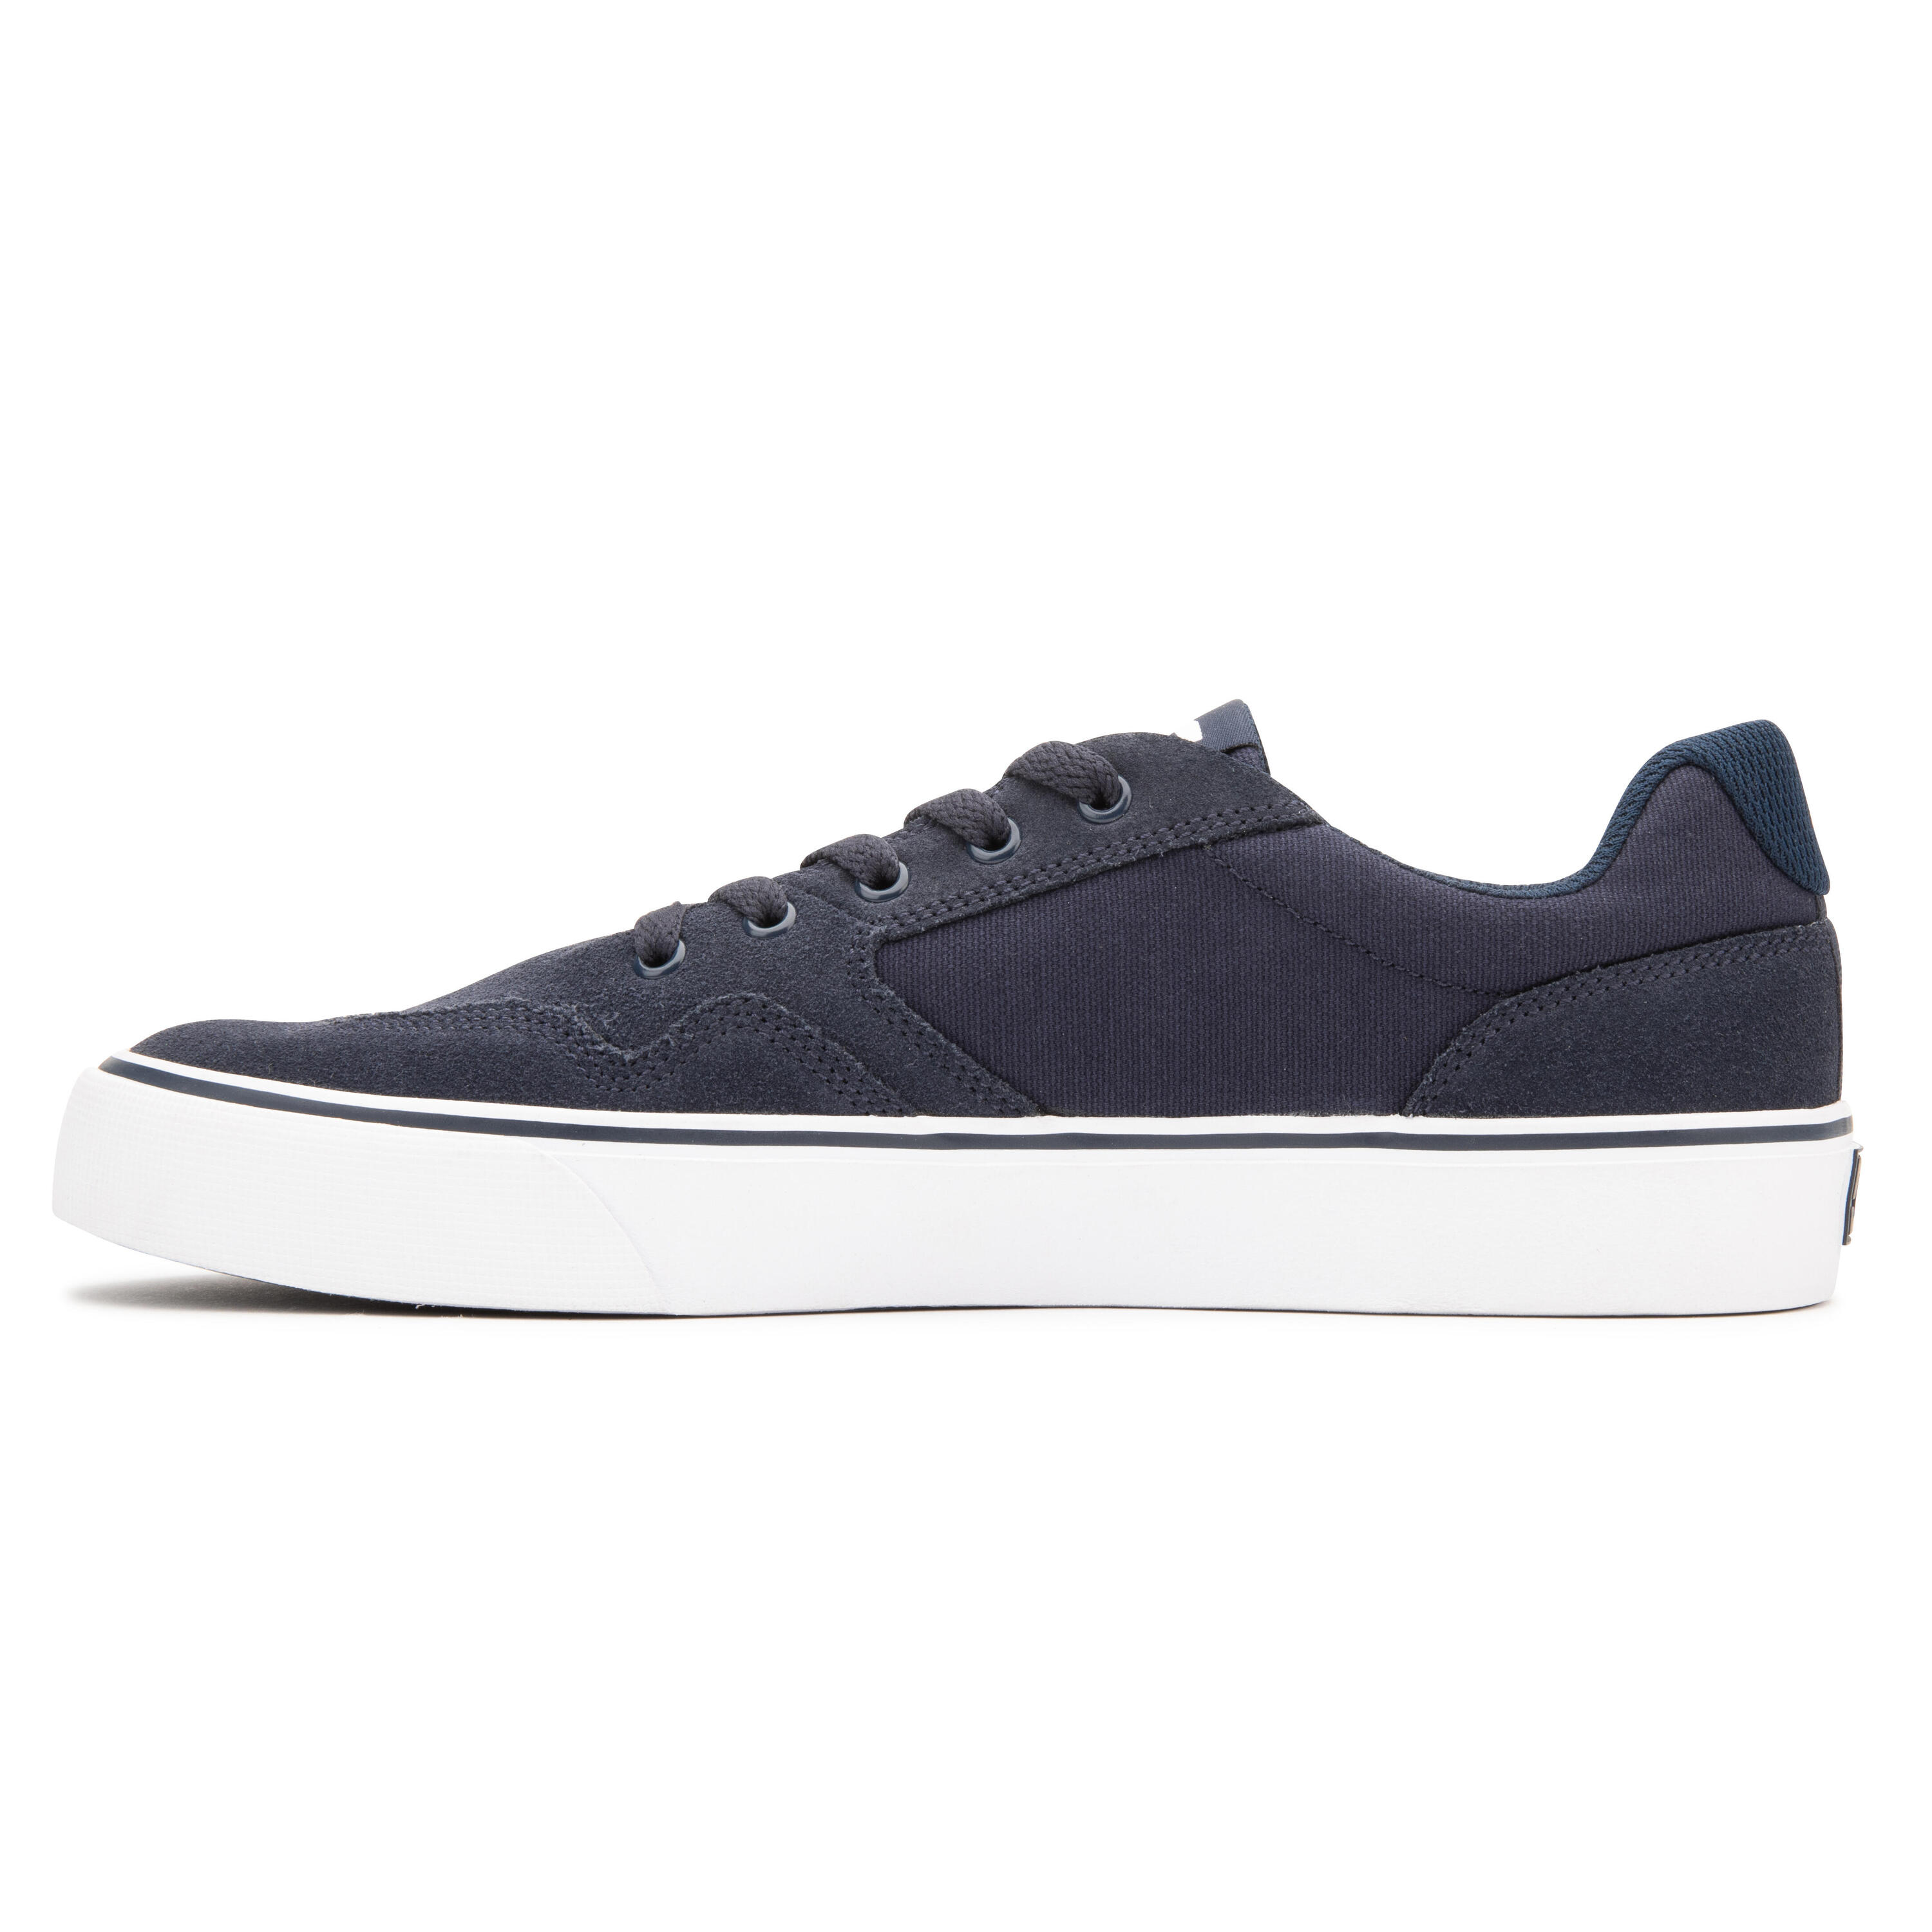 Adult Skate Shoes Rowlan - Blue 3/11